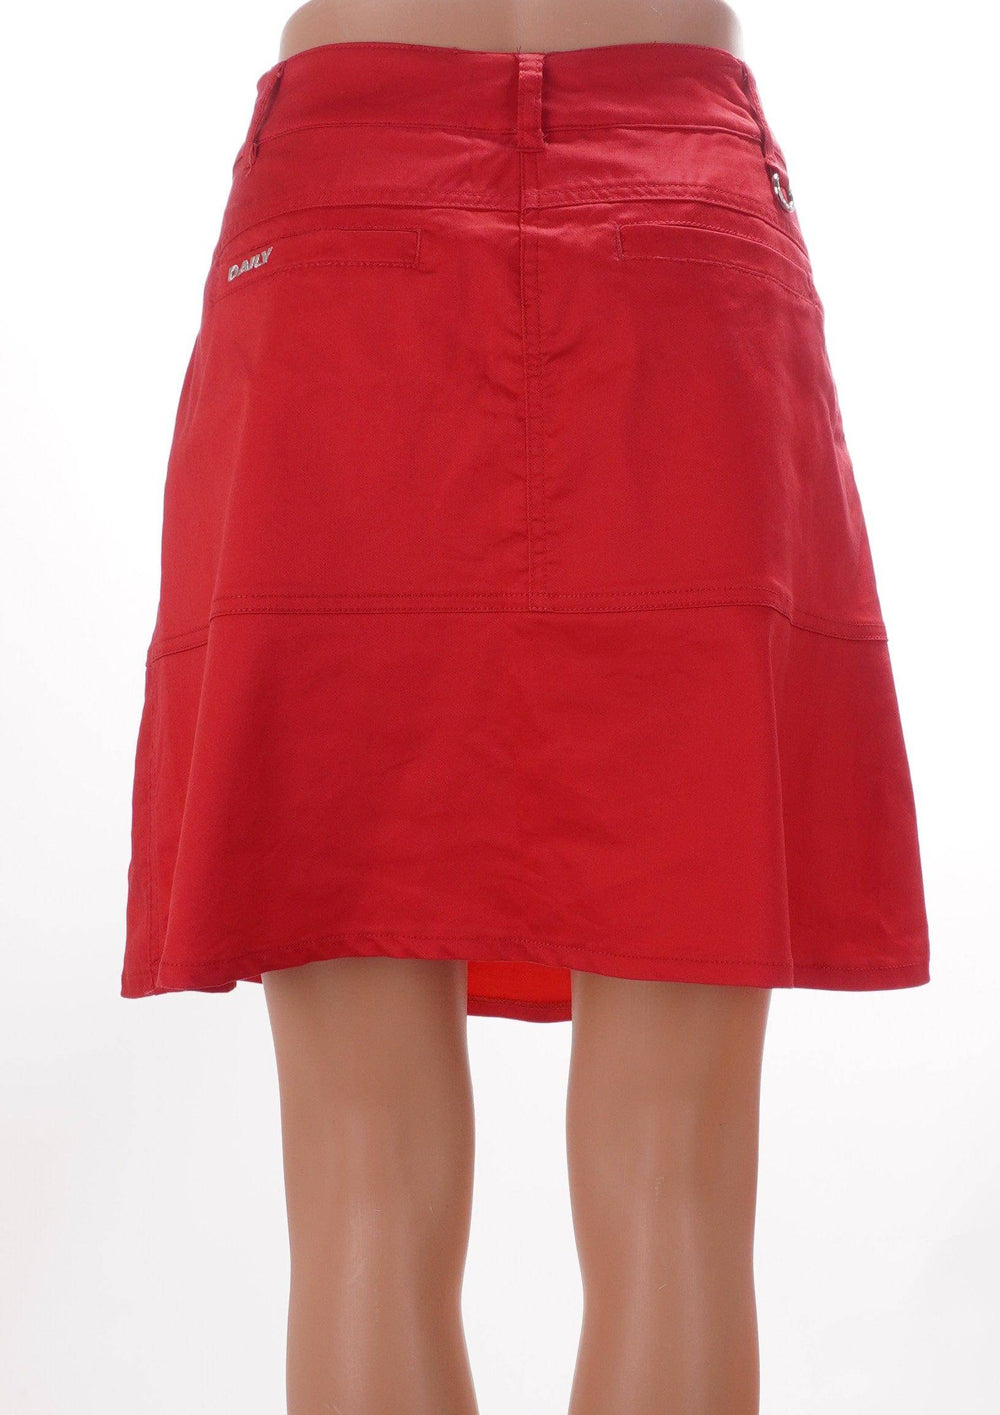 XDS By Daily Sports Daily Sports Skort